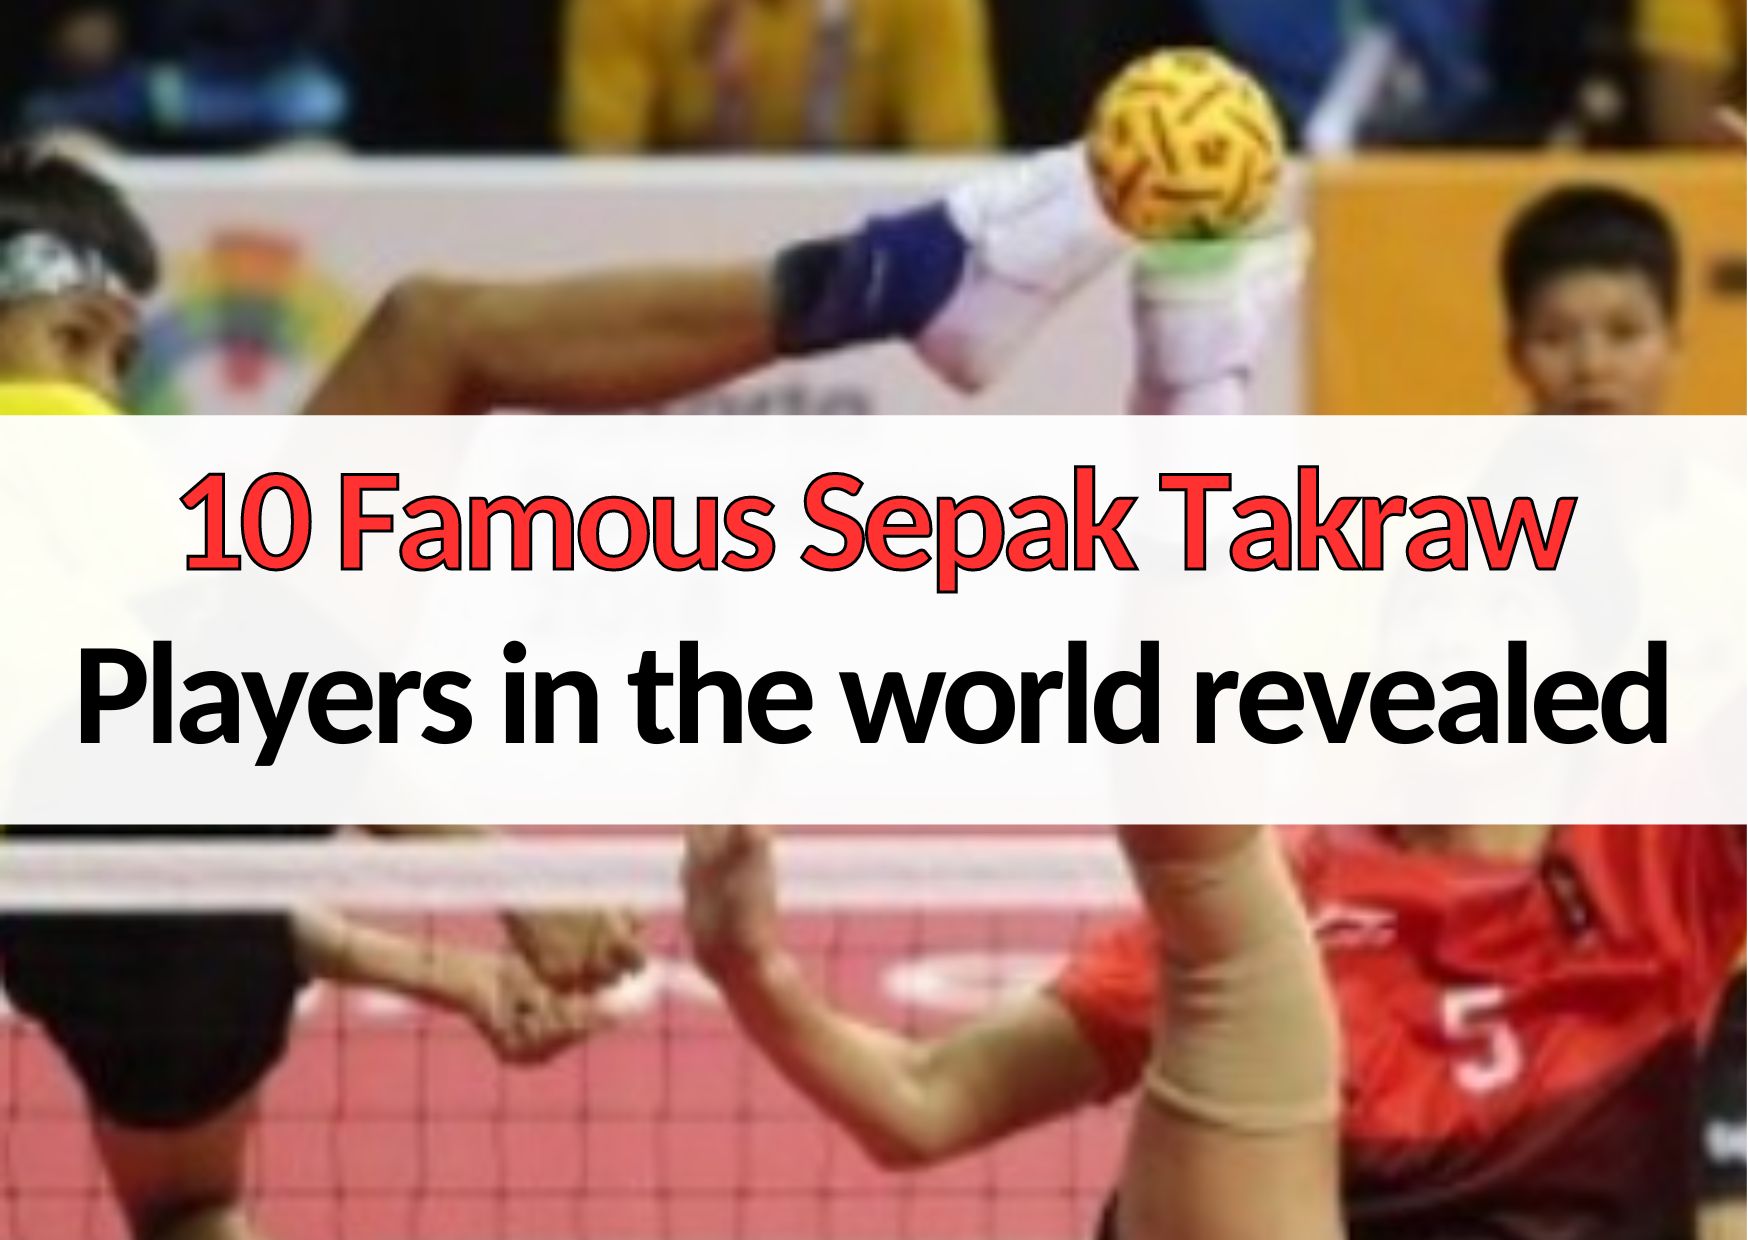 10 famous sepak takraw players in the world revealed